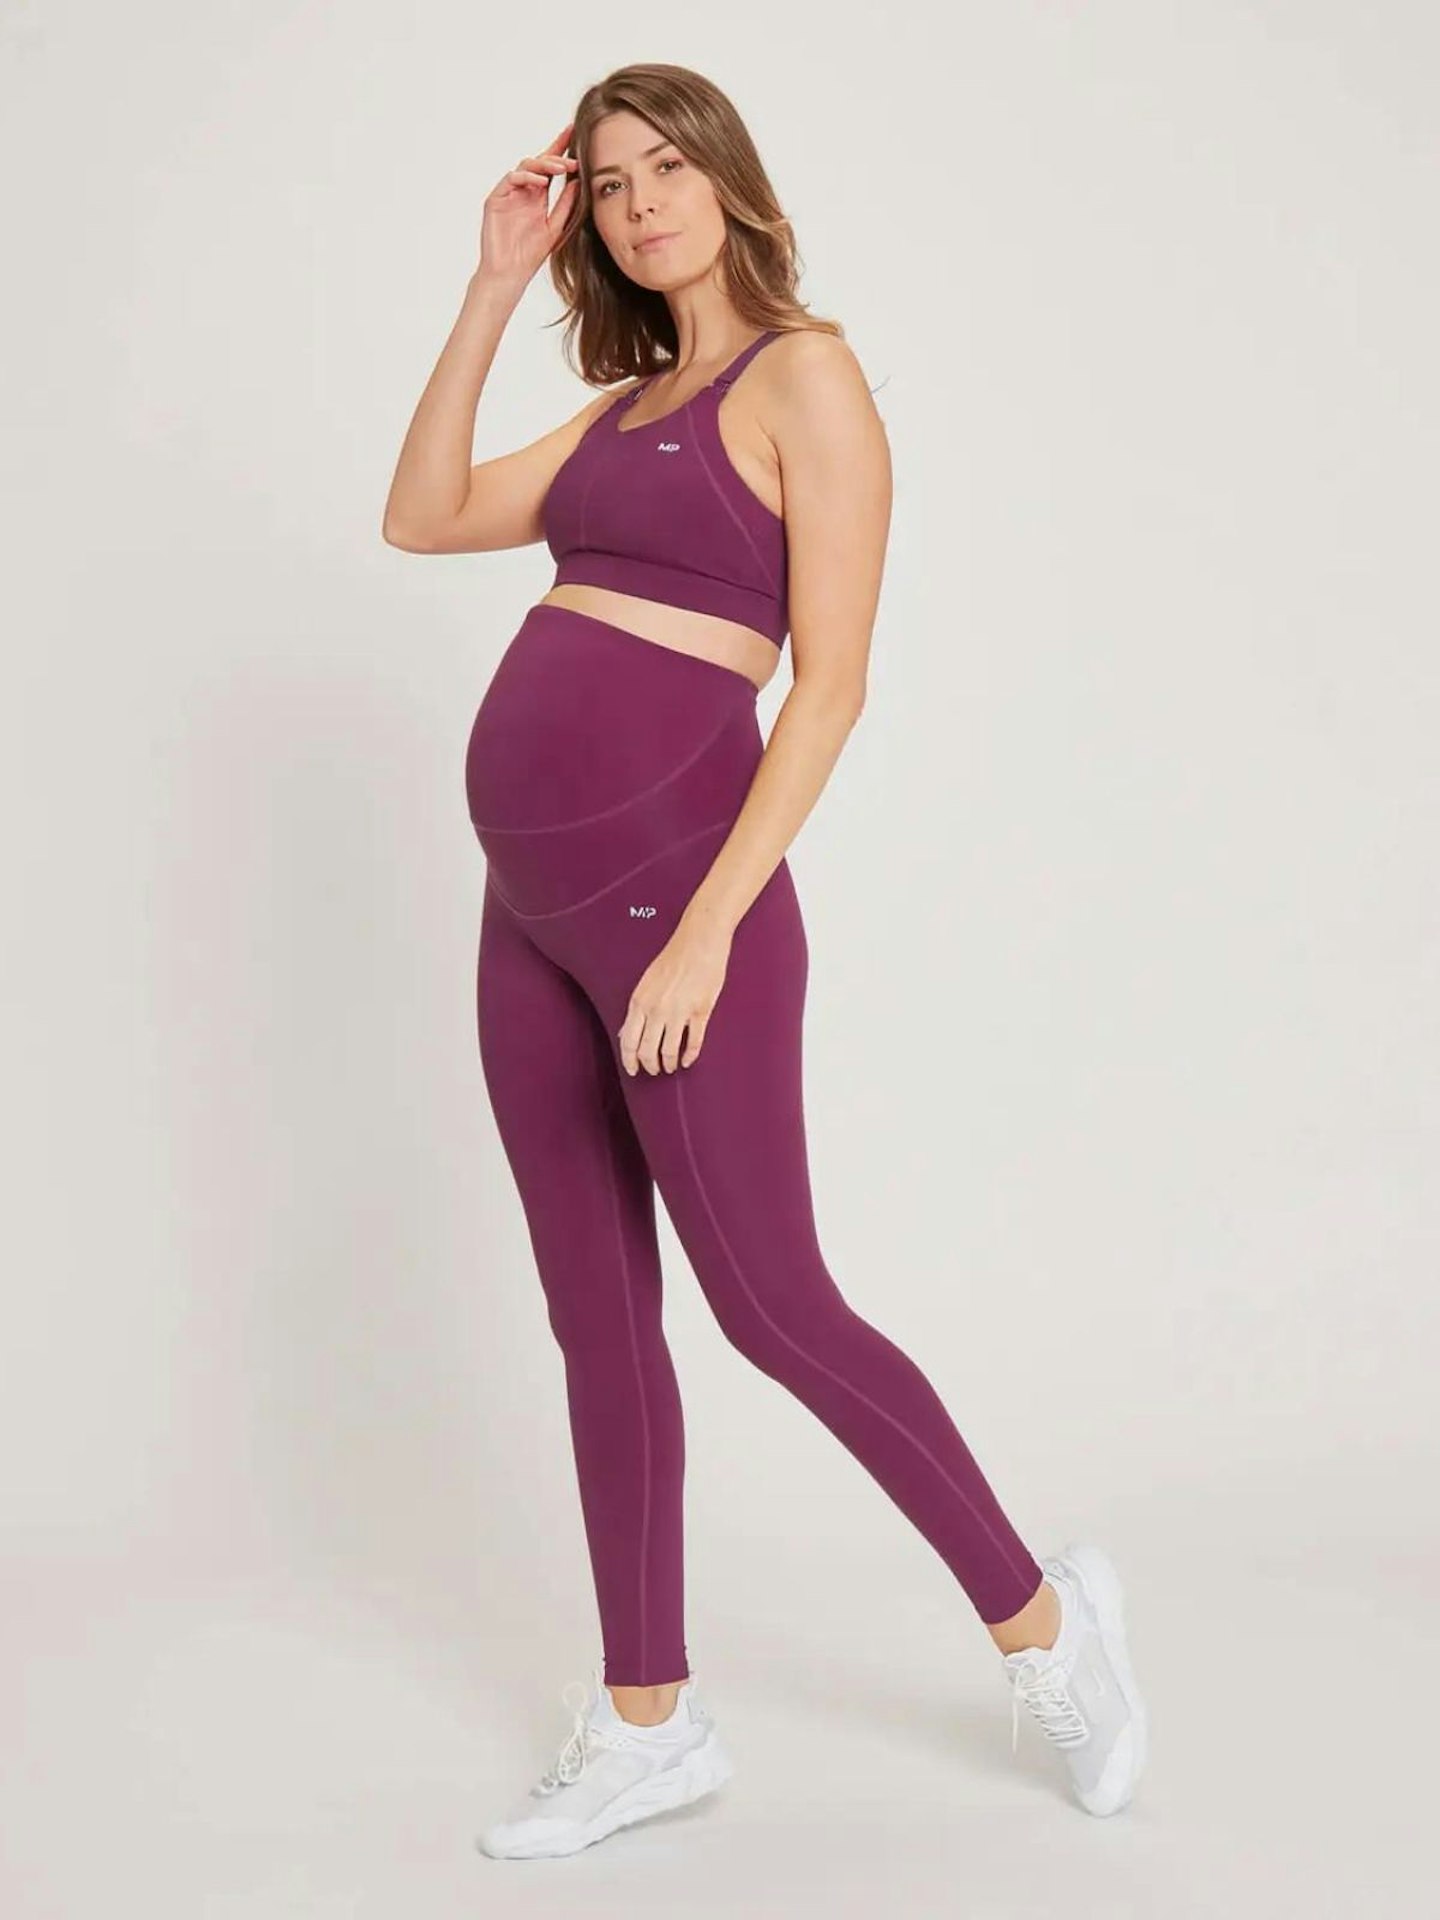 I'm a WH Editor and these Maternity Leggings are the only gym kit